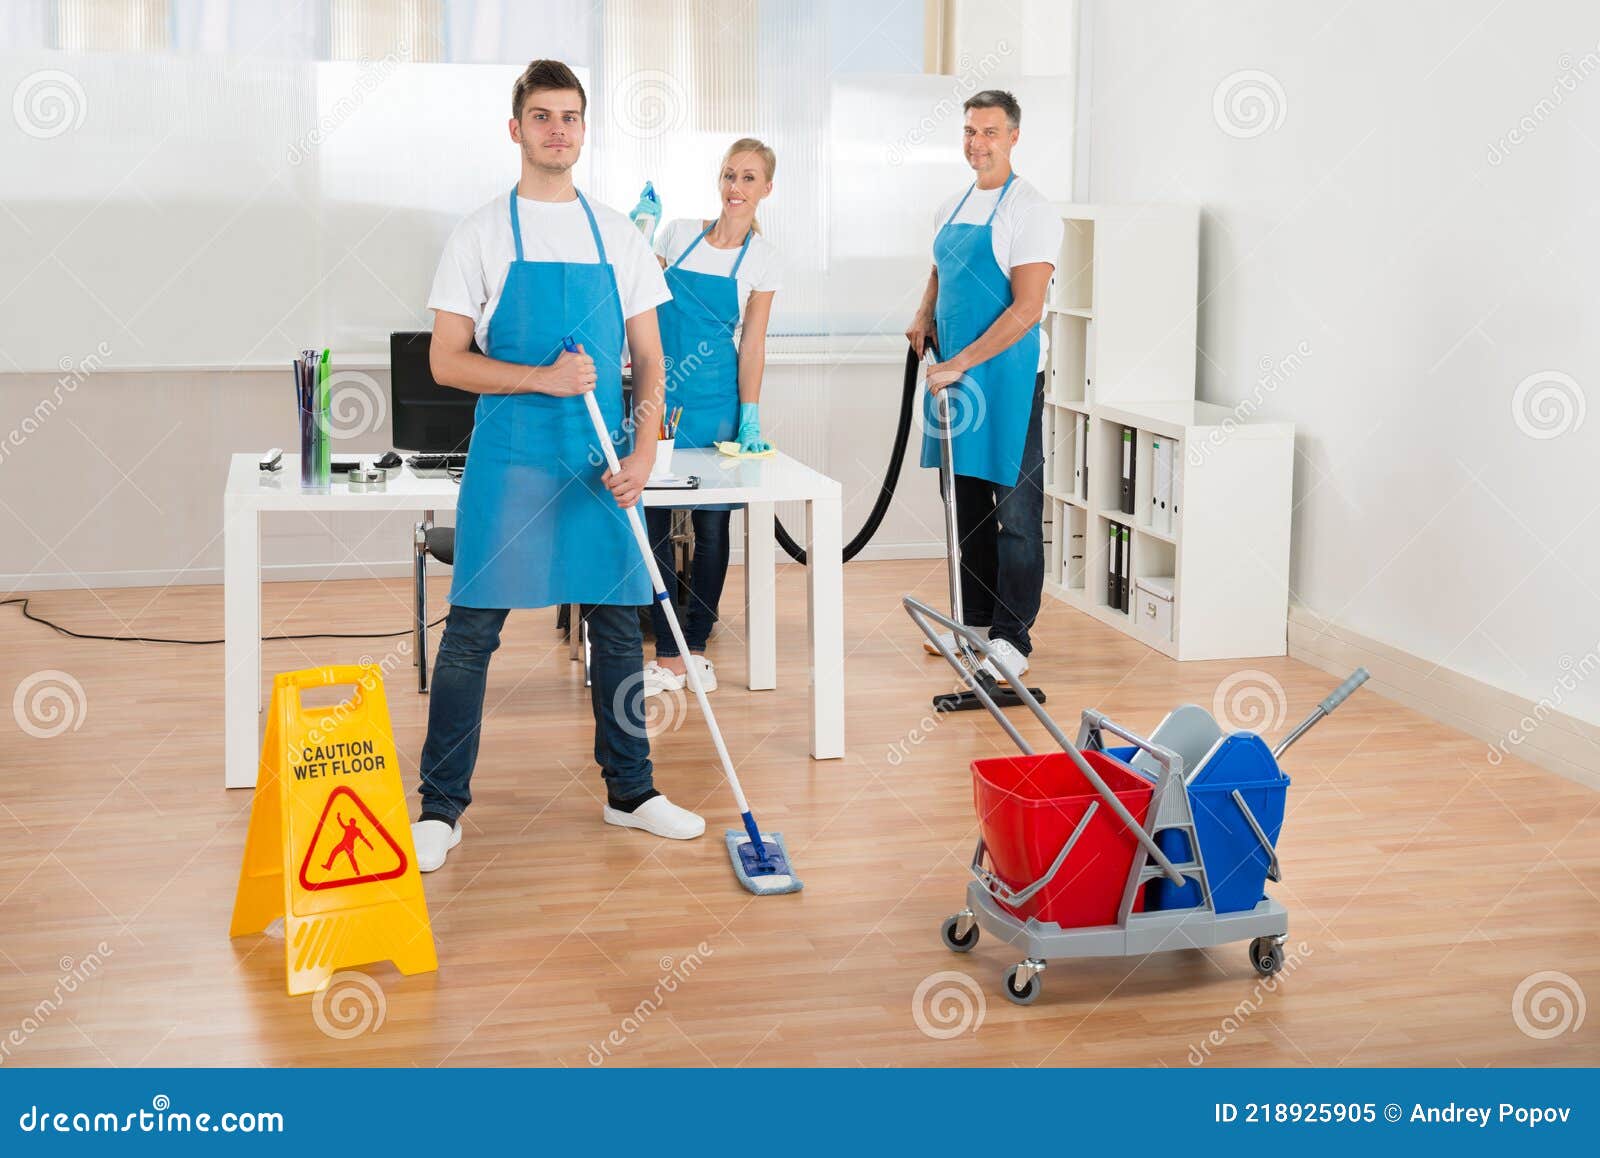 Janitorial Services Maintenance Man Cleaning Office Floor Stock Photo -  Download Image Now - iStock